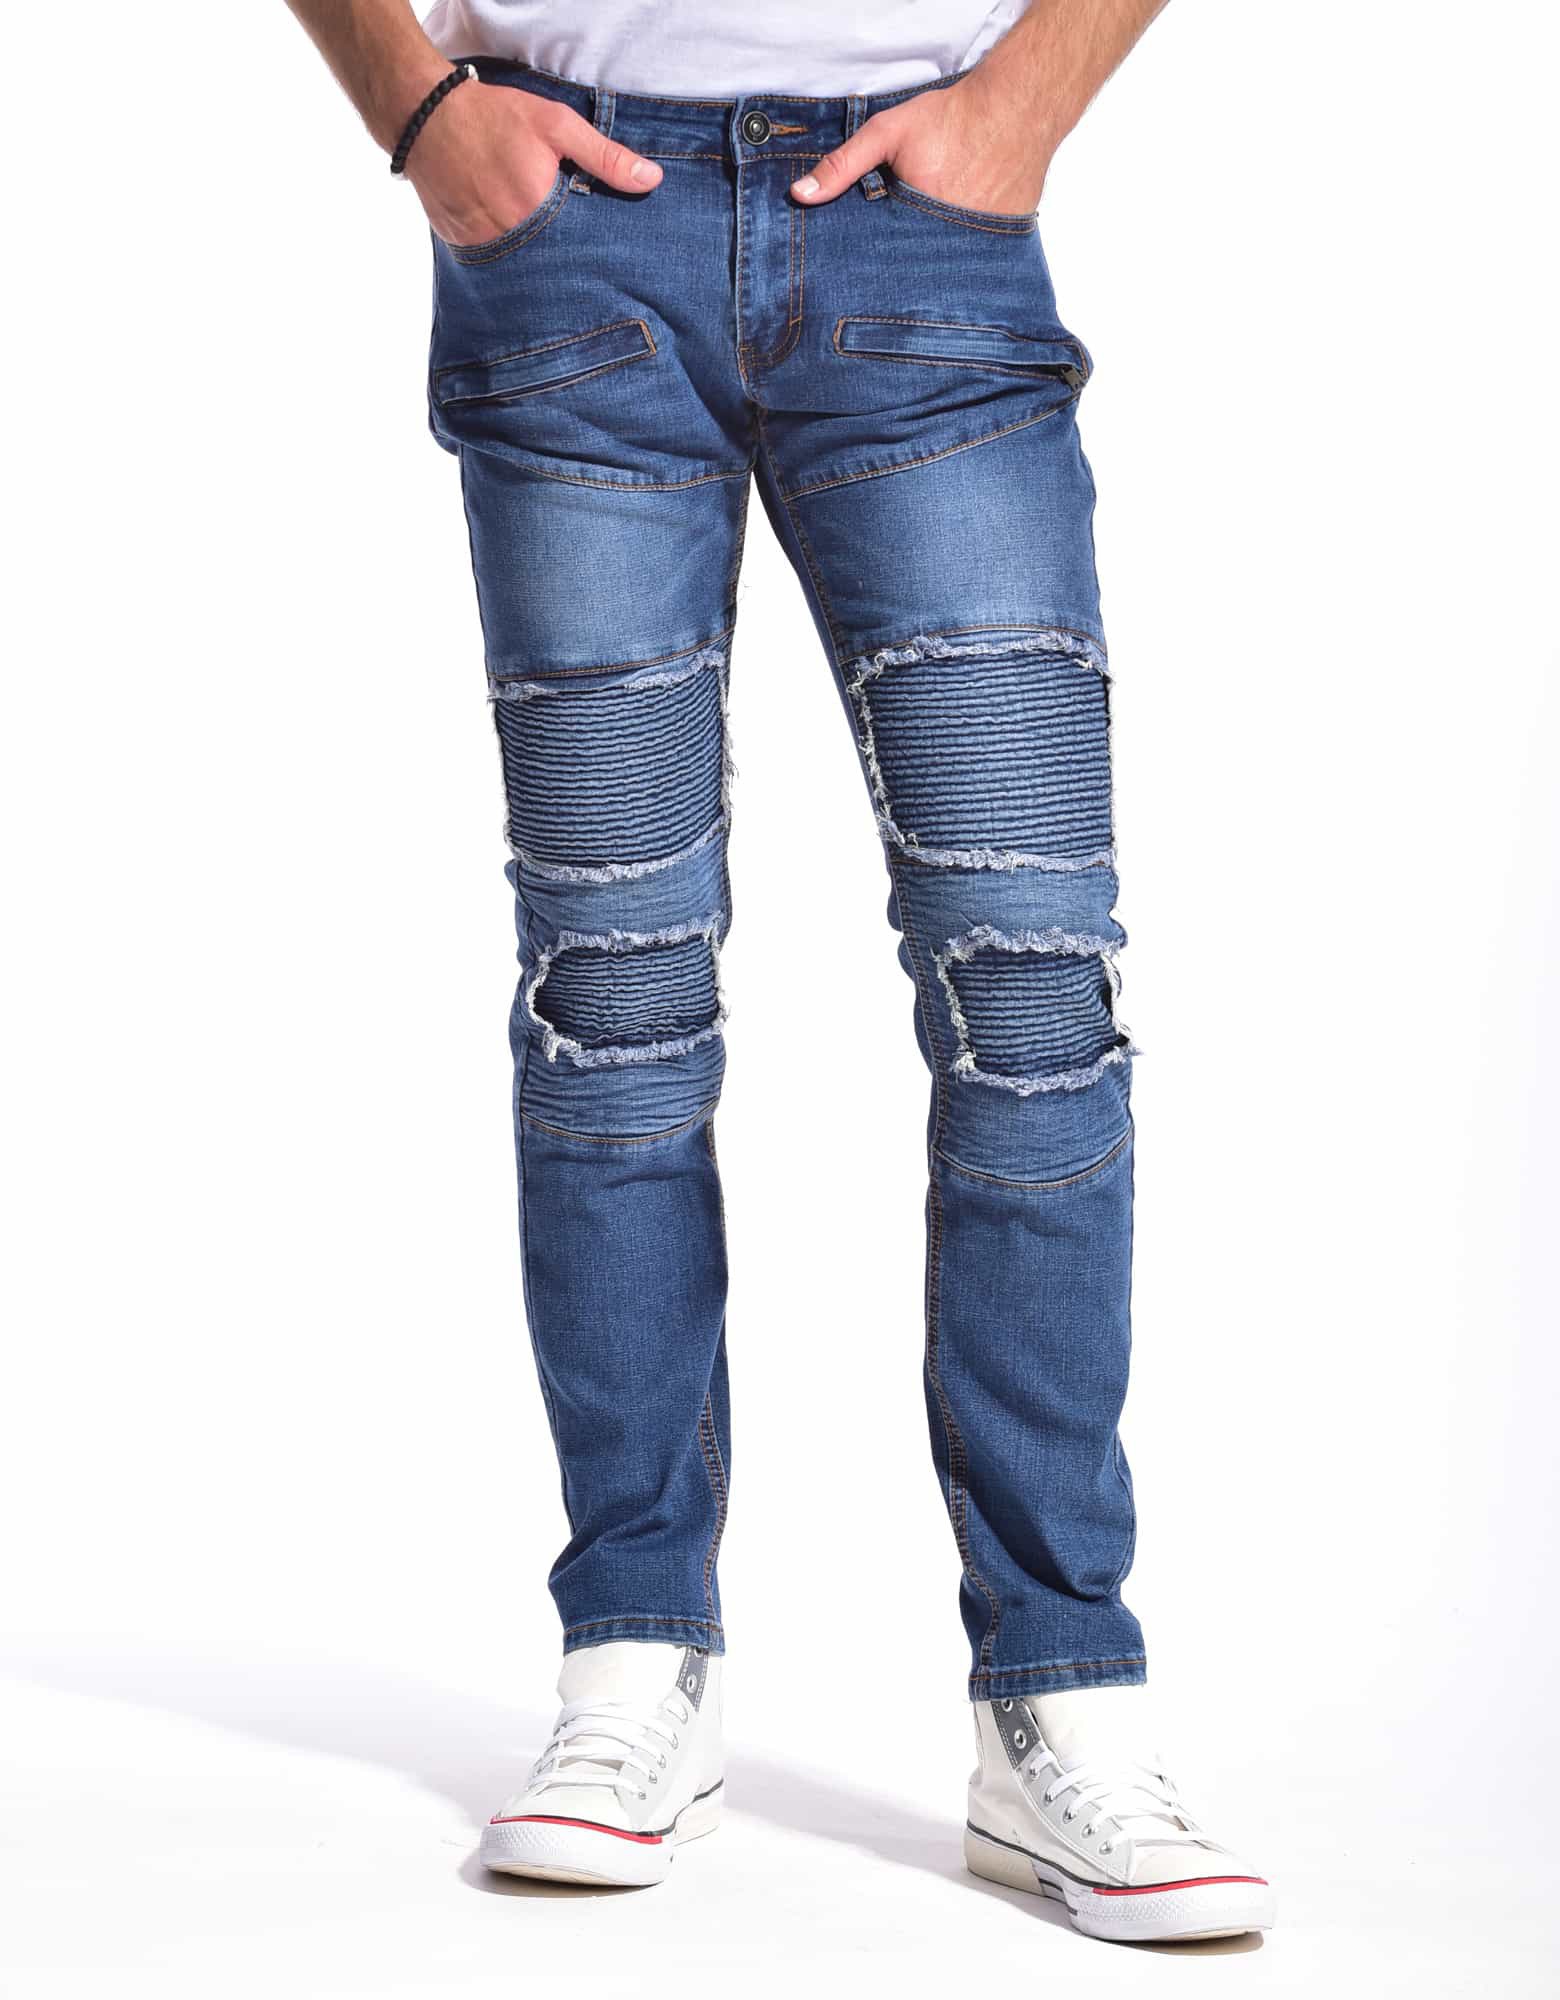 MEN'S MAMMOTH FIVE POCKETS MOTO SLIM FIT JEANS - image 1 of 11